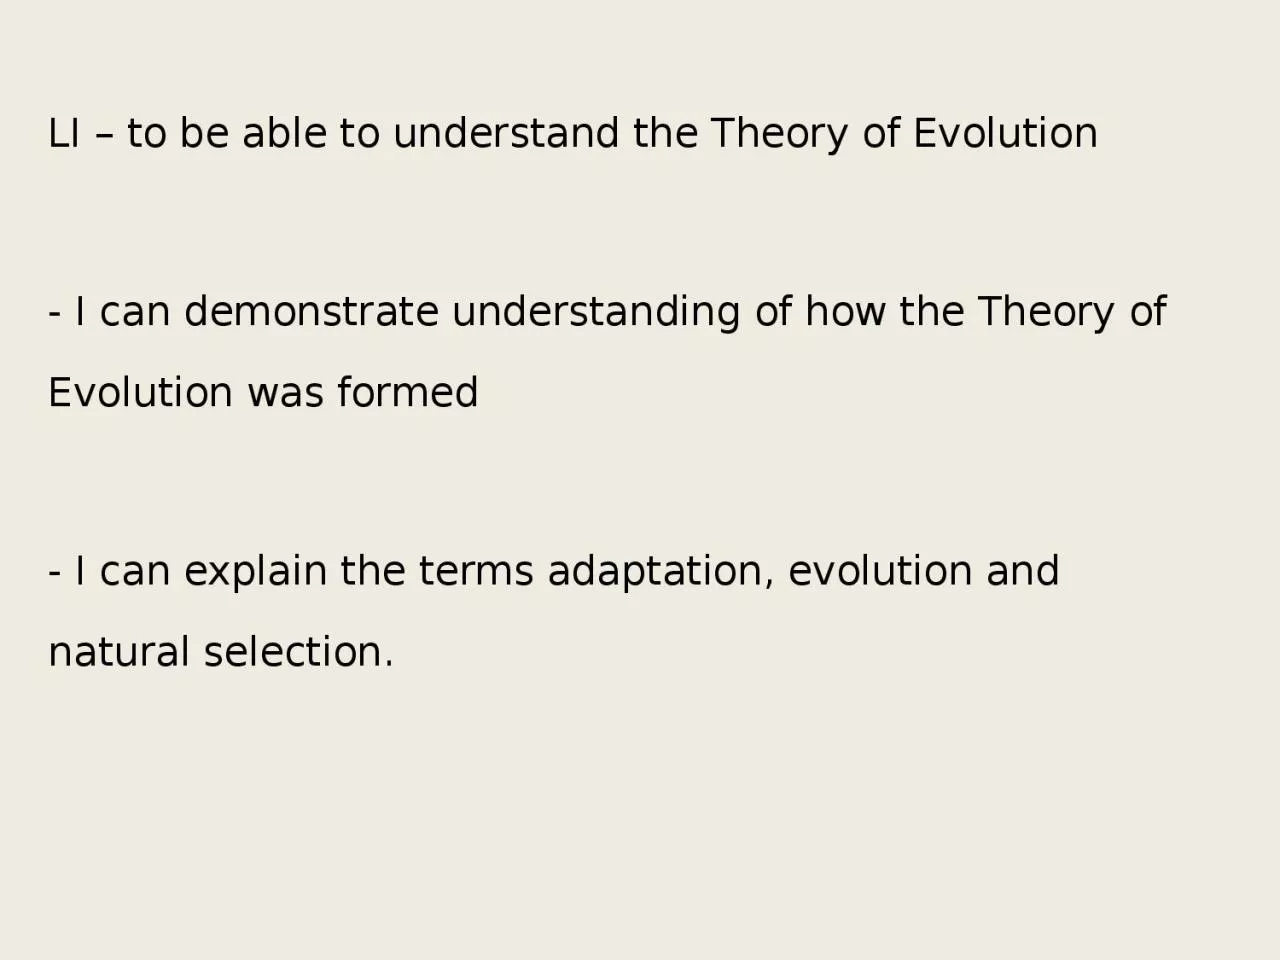 LI – to be able to understand the Theory of Evolution